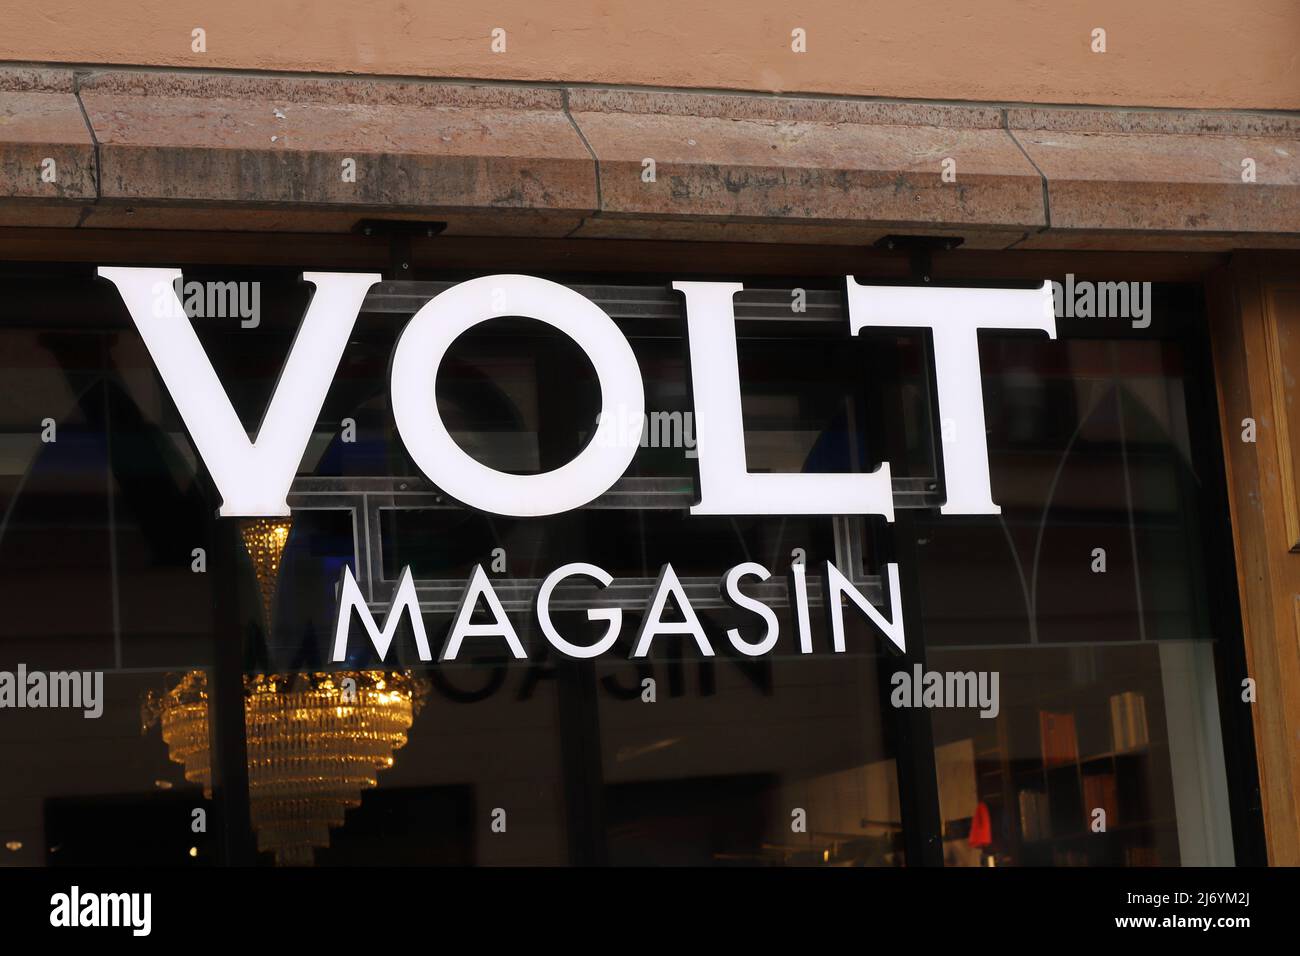 Orebro, Sweden - April 24, 2022: Close-up view of the Volt Magasin fashion store Volt Nagasib located at the Drottninggatan street in downtown Orebro. Stock Photo